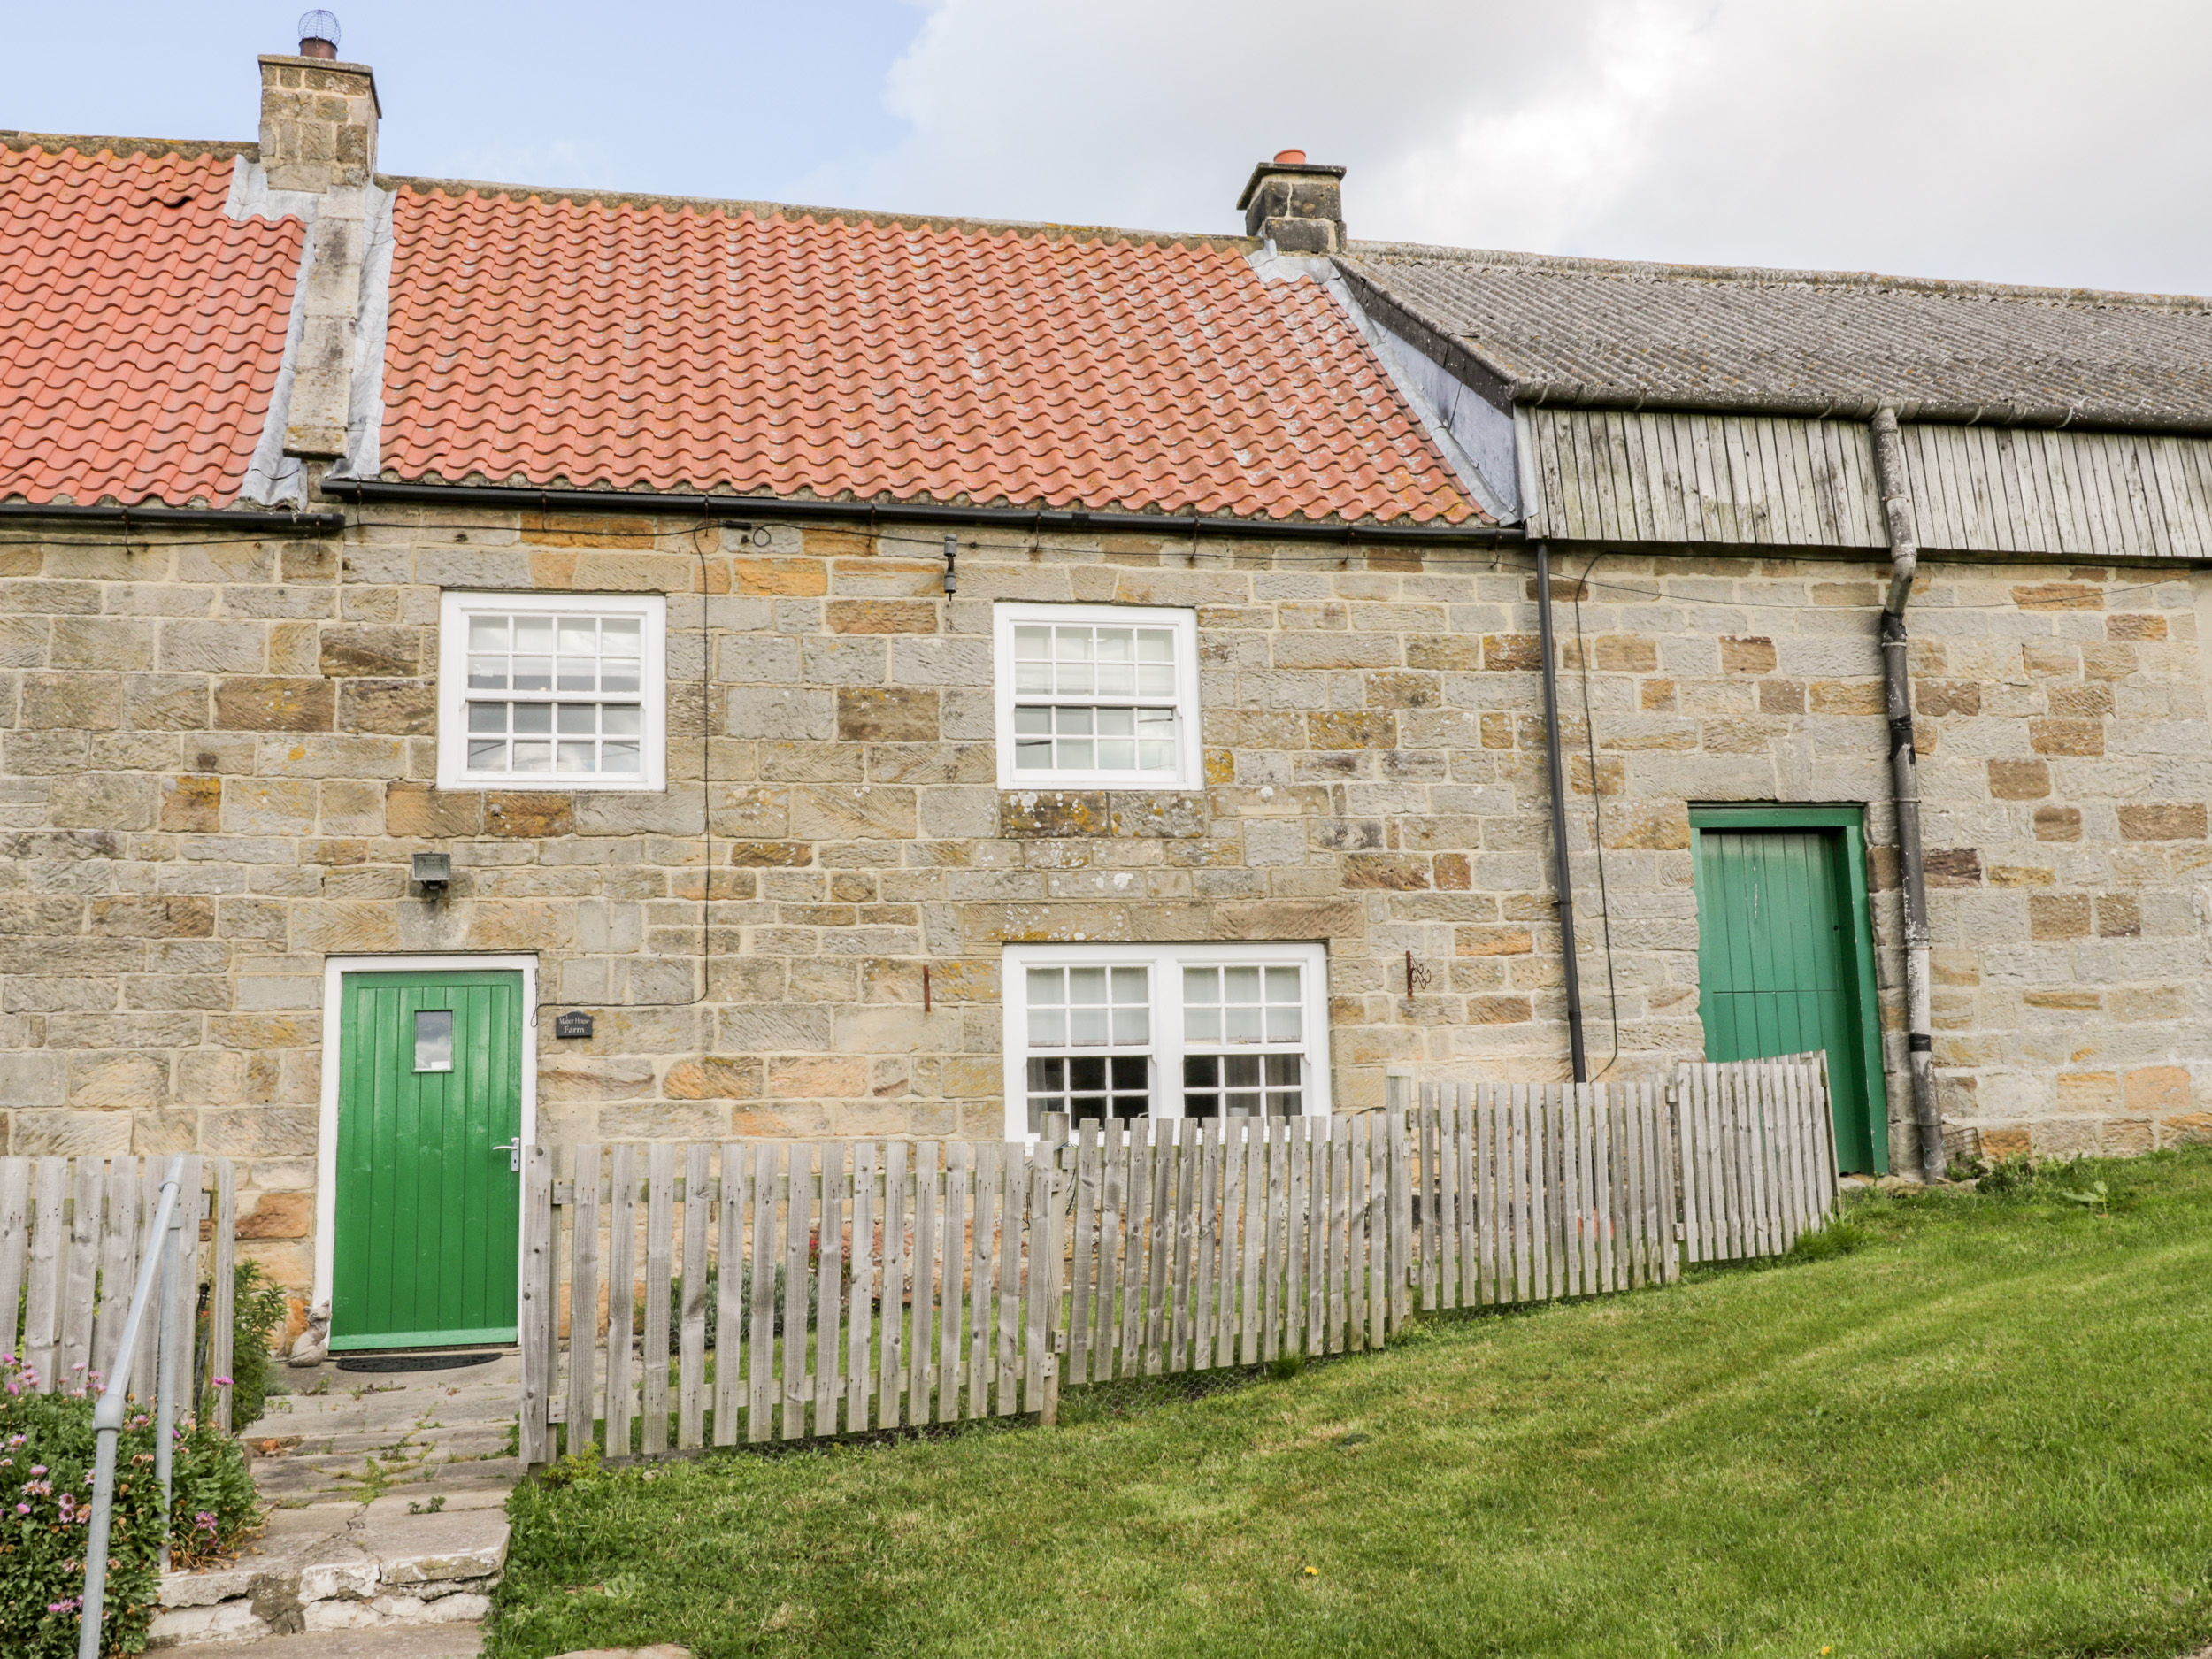 2 bedroom Cottage for rent in Staithes